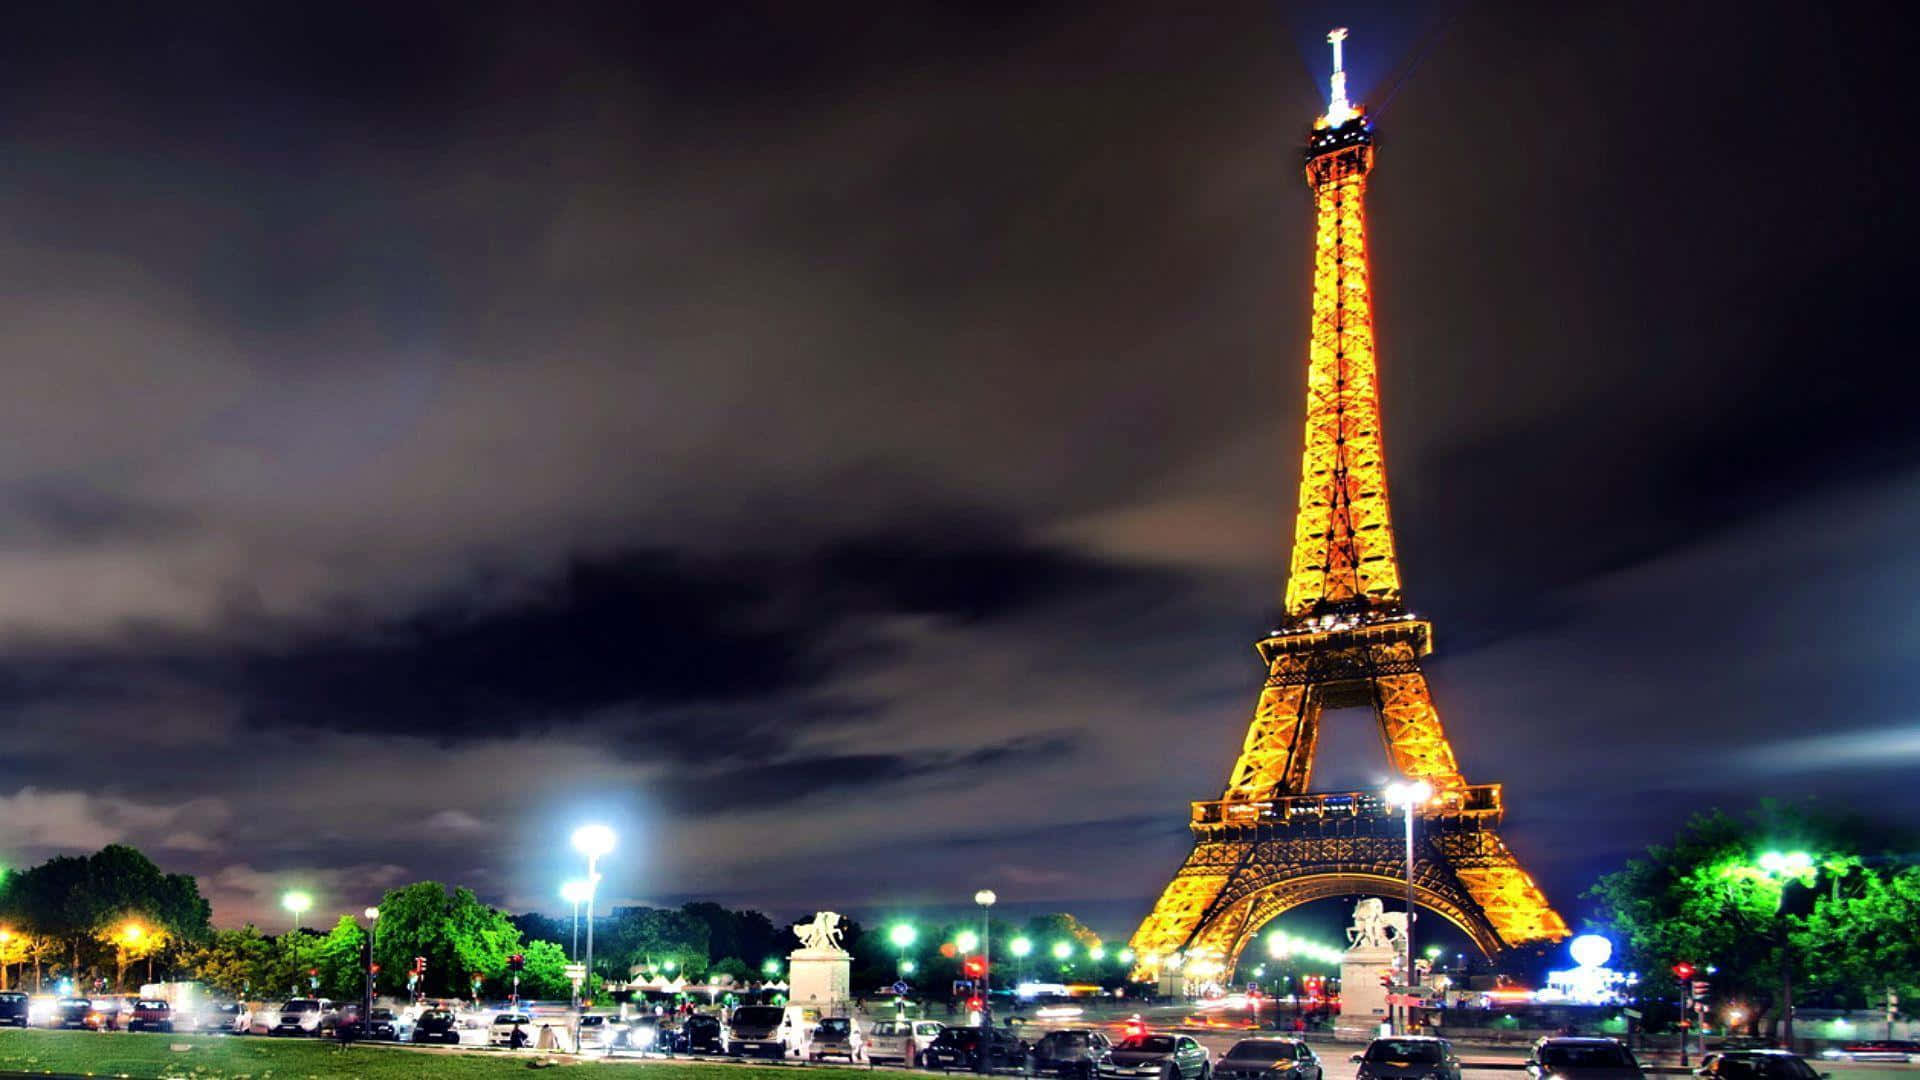 "A view of iconic Eiffel Tower from the Trocadero Gardens in Paris"